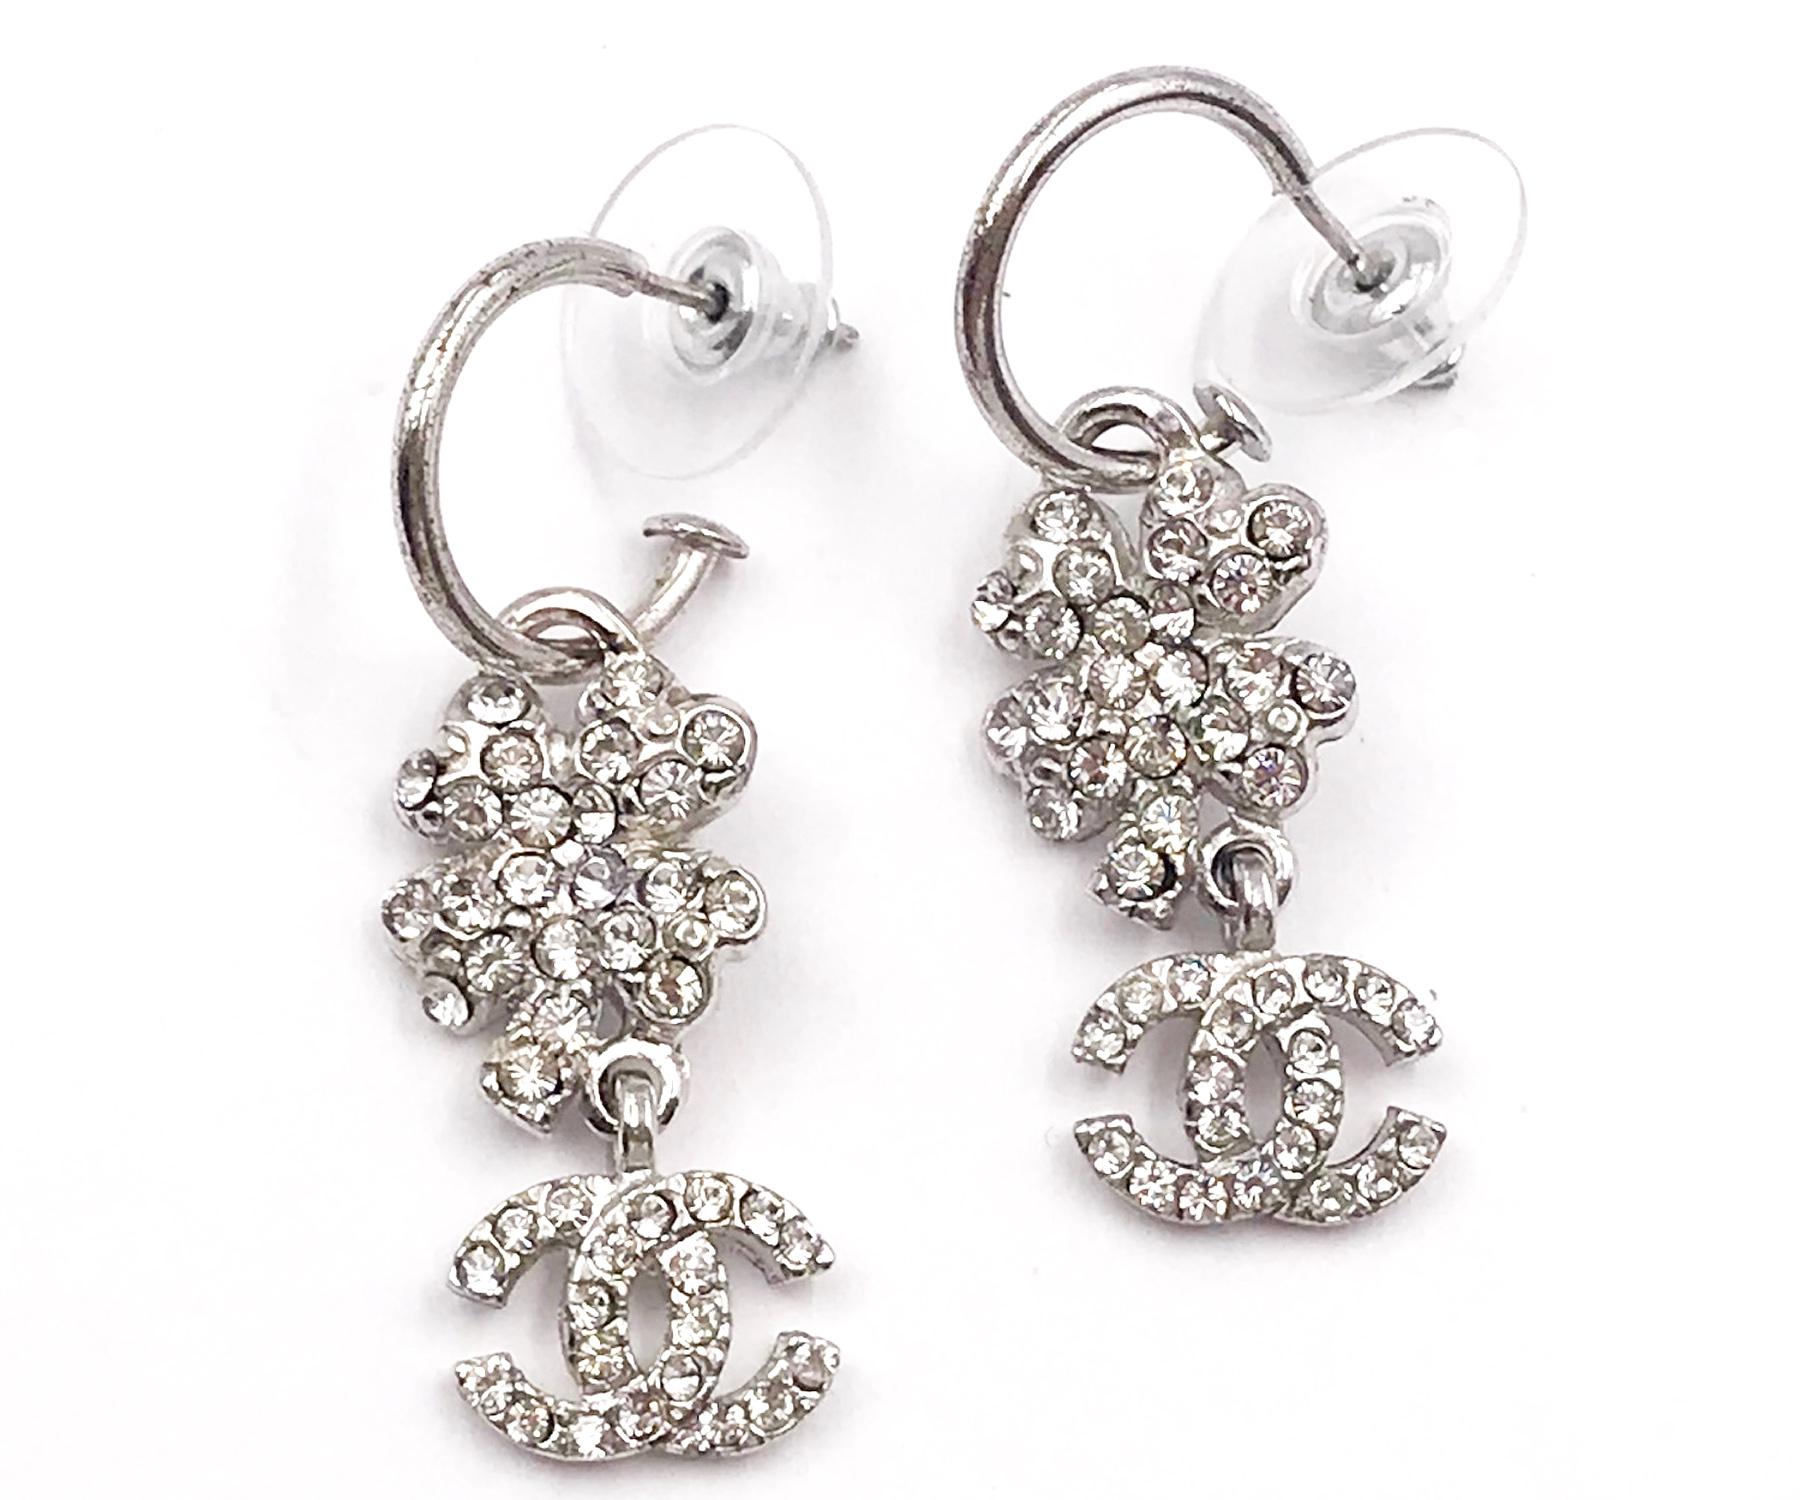 Chanel Silver Clover Crystal CC Long Hoop Piercing   Earrings

*Marked 05
*Made in France

-It's approximately 1.5